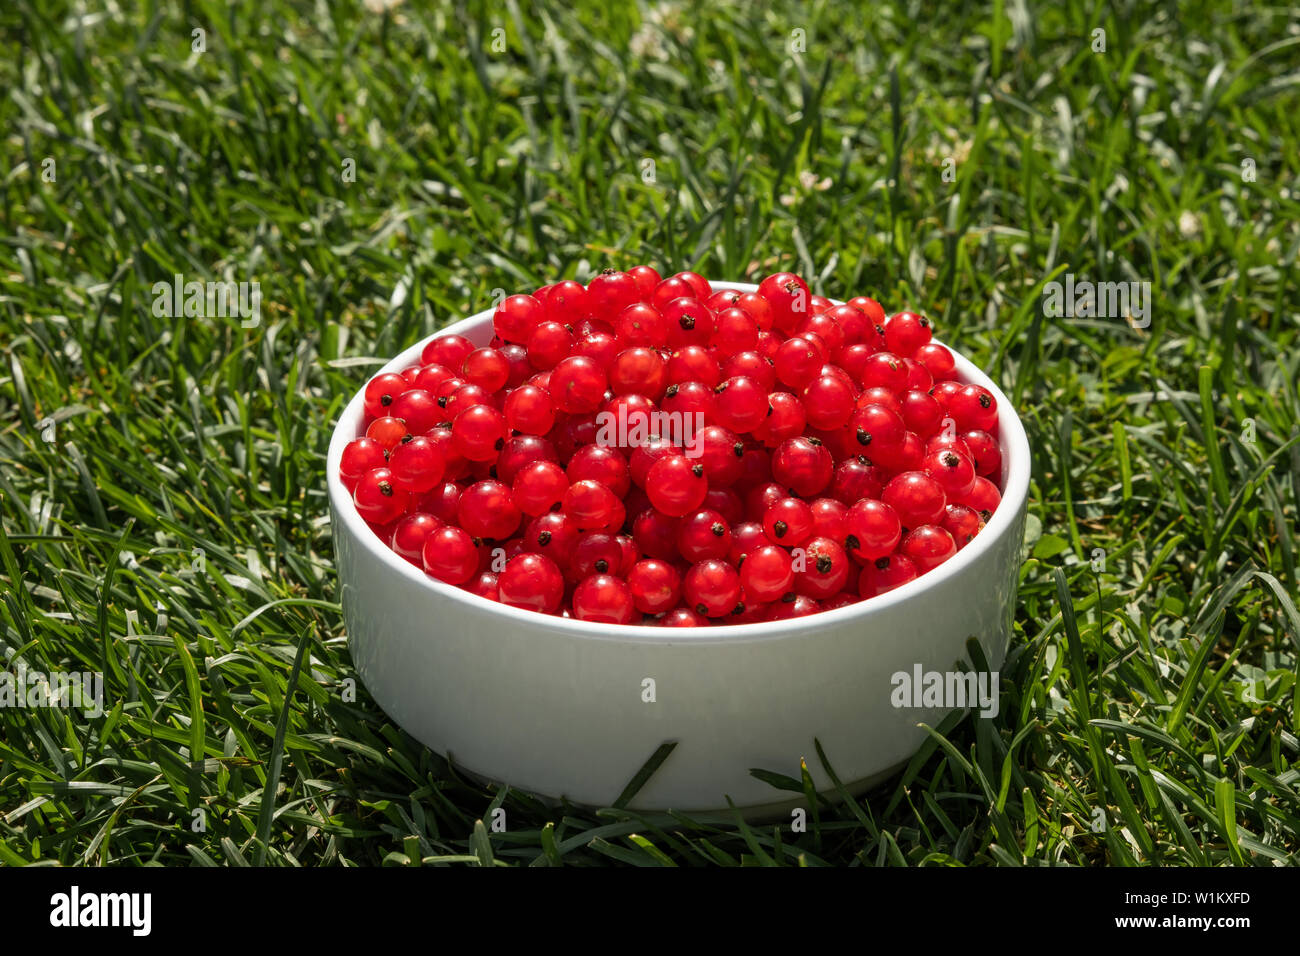 Description: red currant berries on a white plate in green grass Stock Photo